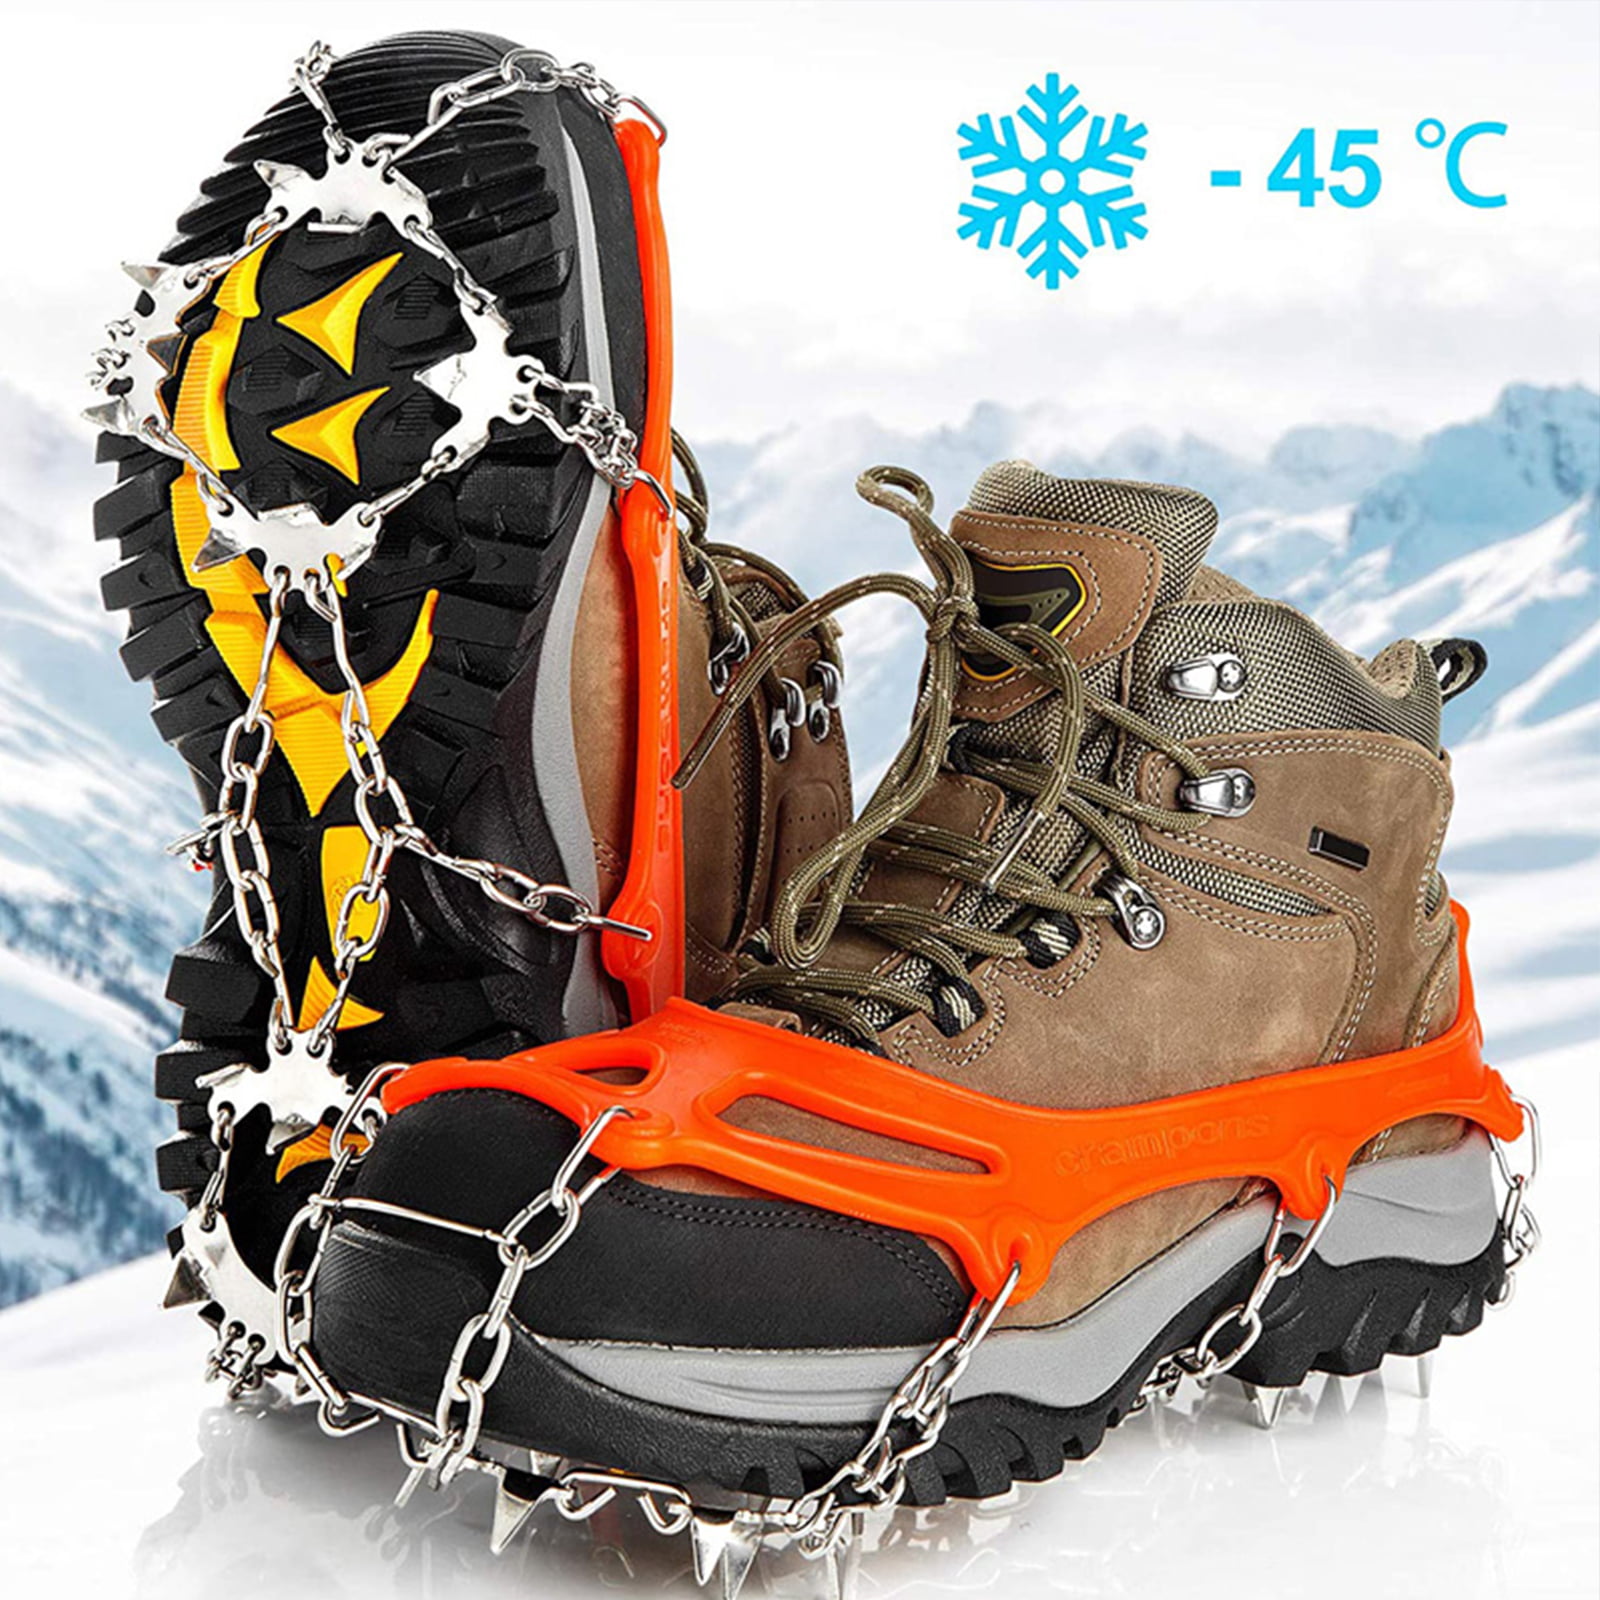 Crampons Ice Cleats Traction Snow Grips for Boots Shoes Women Men Kids Anti Slip 21 Stainless Steel Spikes Safe Protect for Hiking Fishing Walking Climbing Mountaineering 